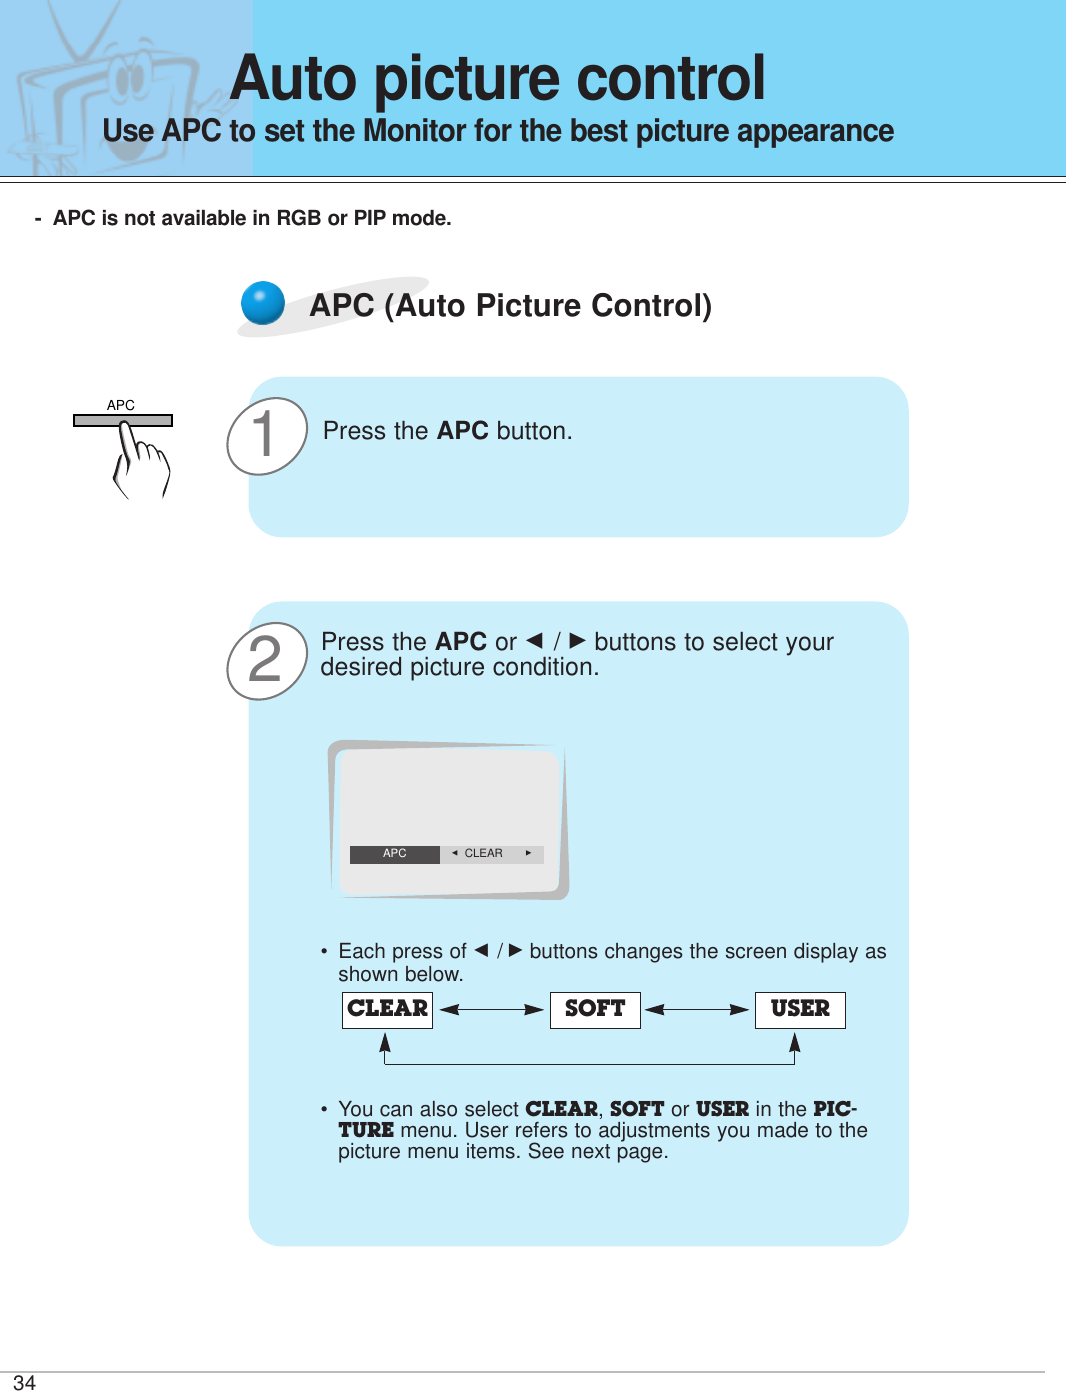 3421APC (Auto Picture Control)Press the APC button.Press the APC or F / Gbuttons to select yourdesired picture condition.•Each press of F /Gbuttons changes the screen display asshown below.• You can also select CLEAR, SOFT or USER in the PIC-TURE menu. User refers to adjustments you made to thepicture menu items. See next page.CLEAR SOFT USERF  CLEAR    GAPCAuto picture controlUse APC to set the Monitor for the best picture appearance-APC is not available in RGB or PIP mode.APC